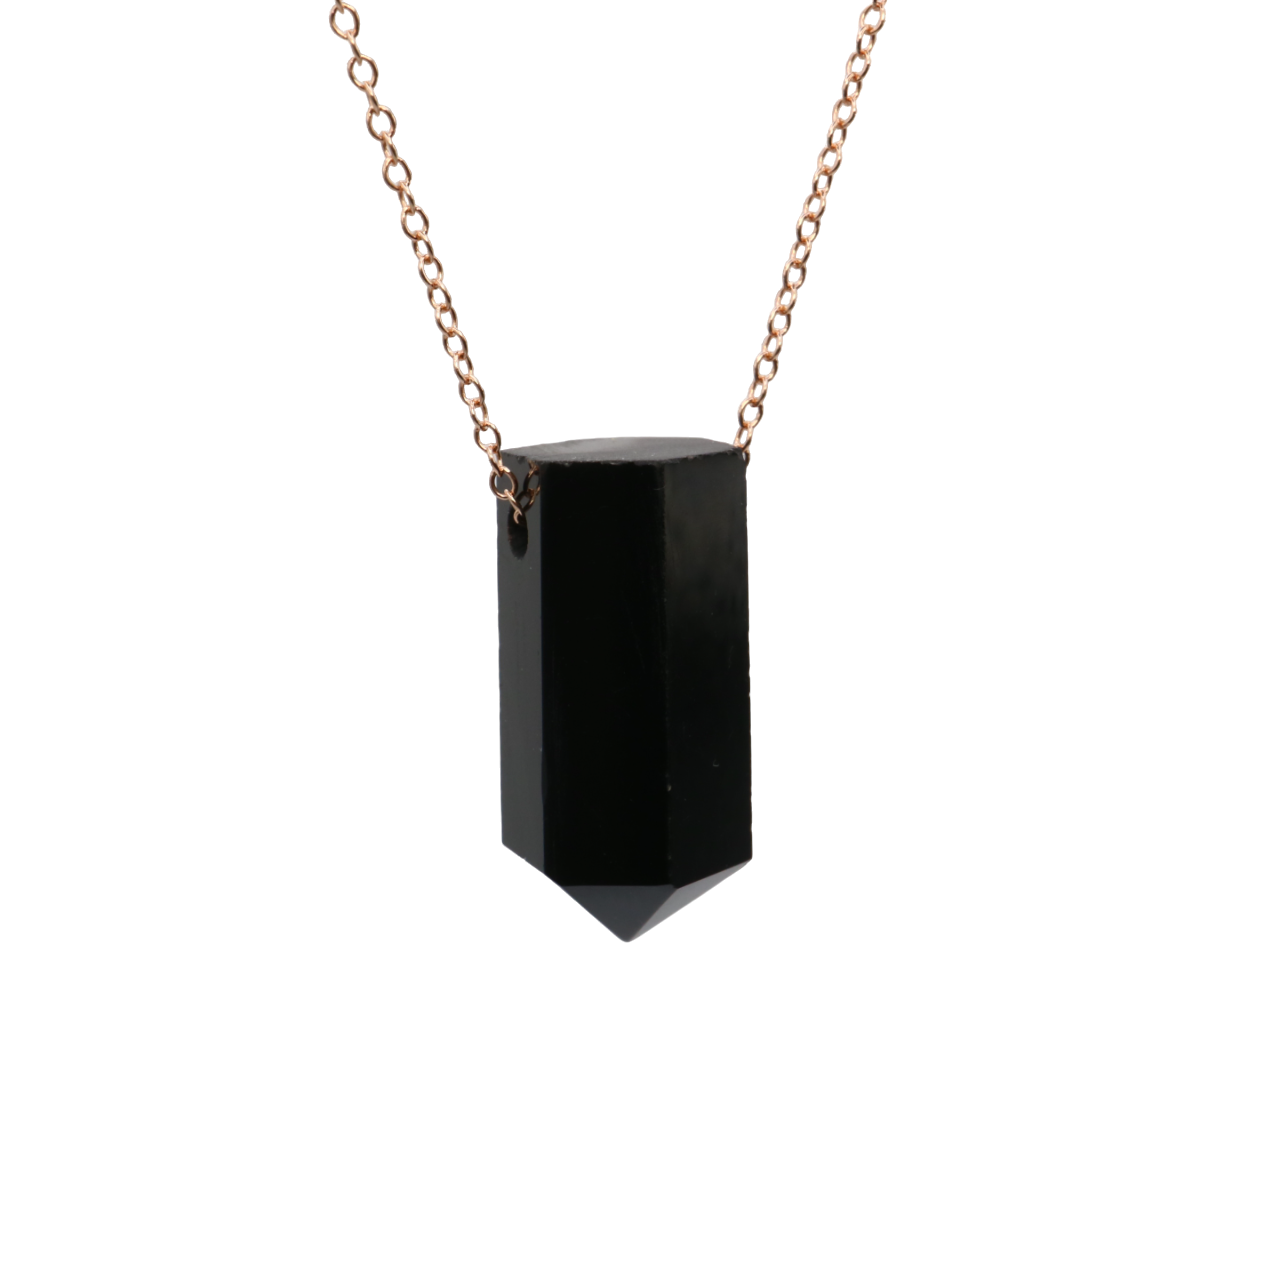 Black Onyx on a fine Rose Gold plated 925 Sterling Silver chain